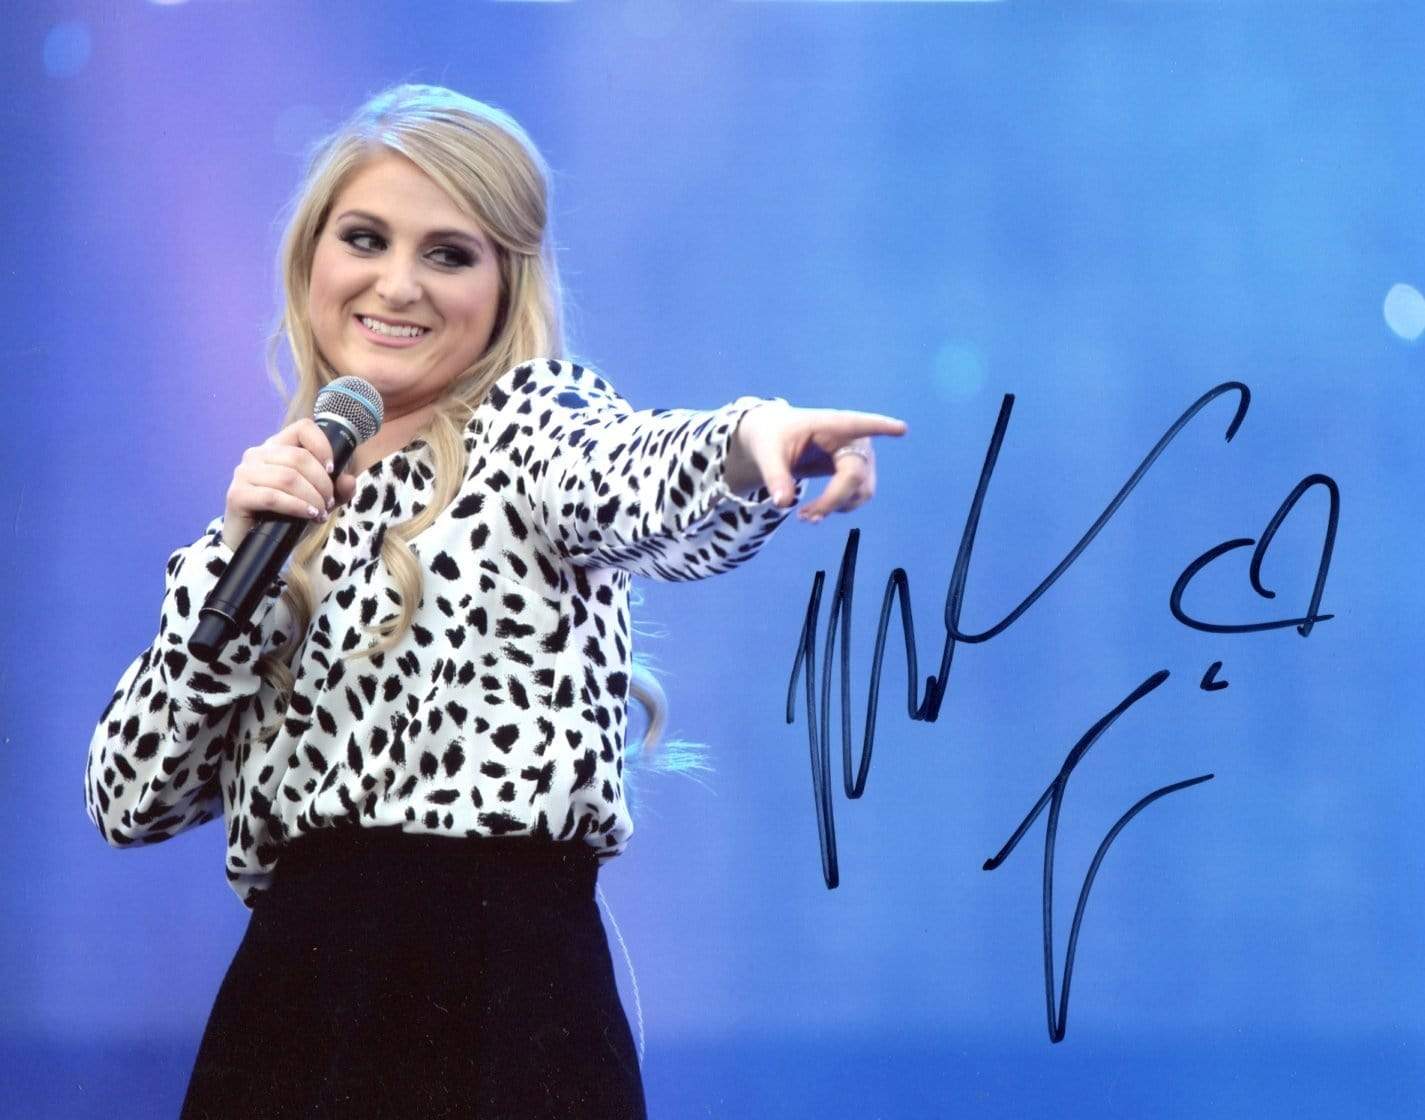 NEW Meghan Trainor Made You Look Autograph Auto Signed CD Single SEALED